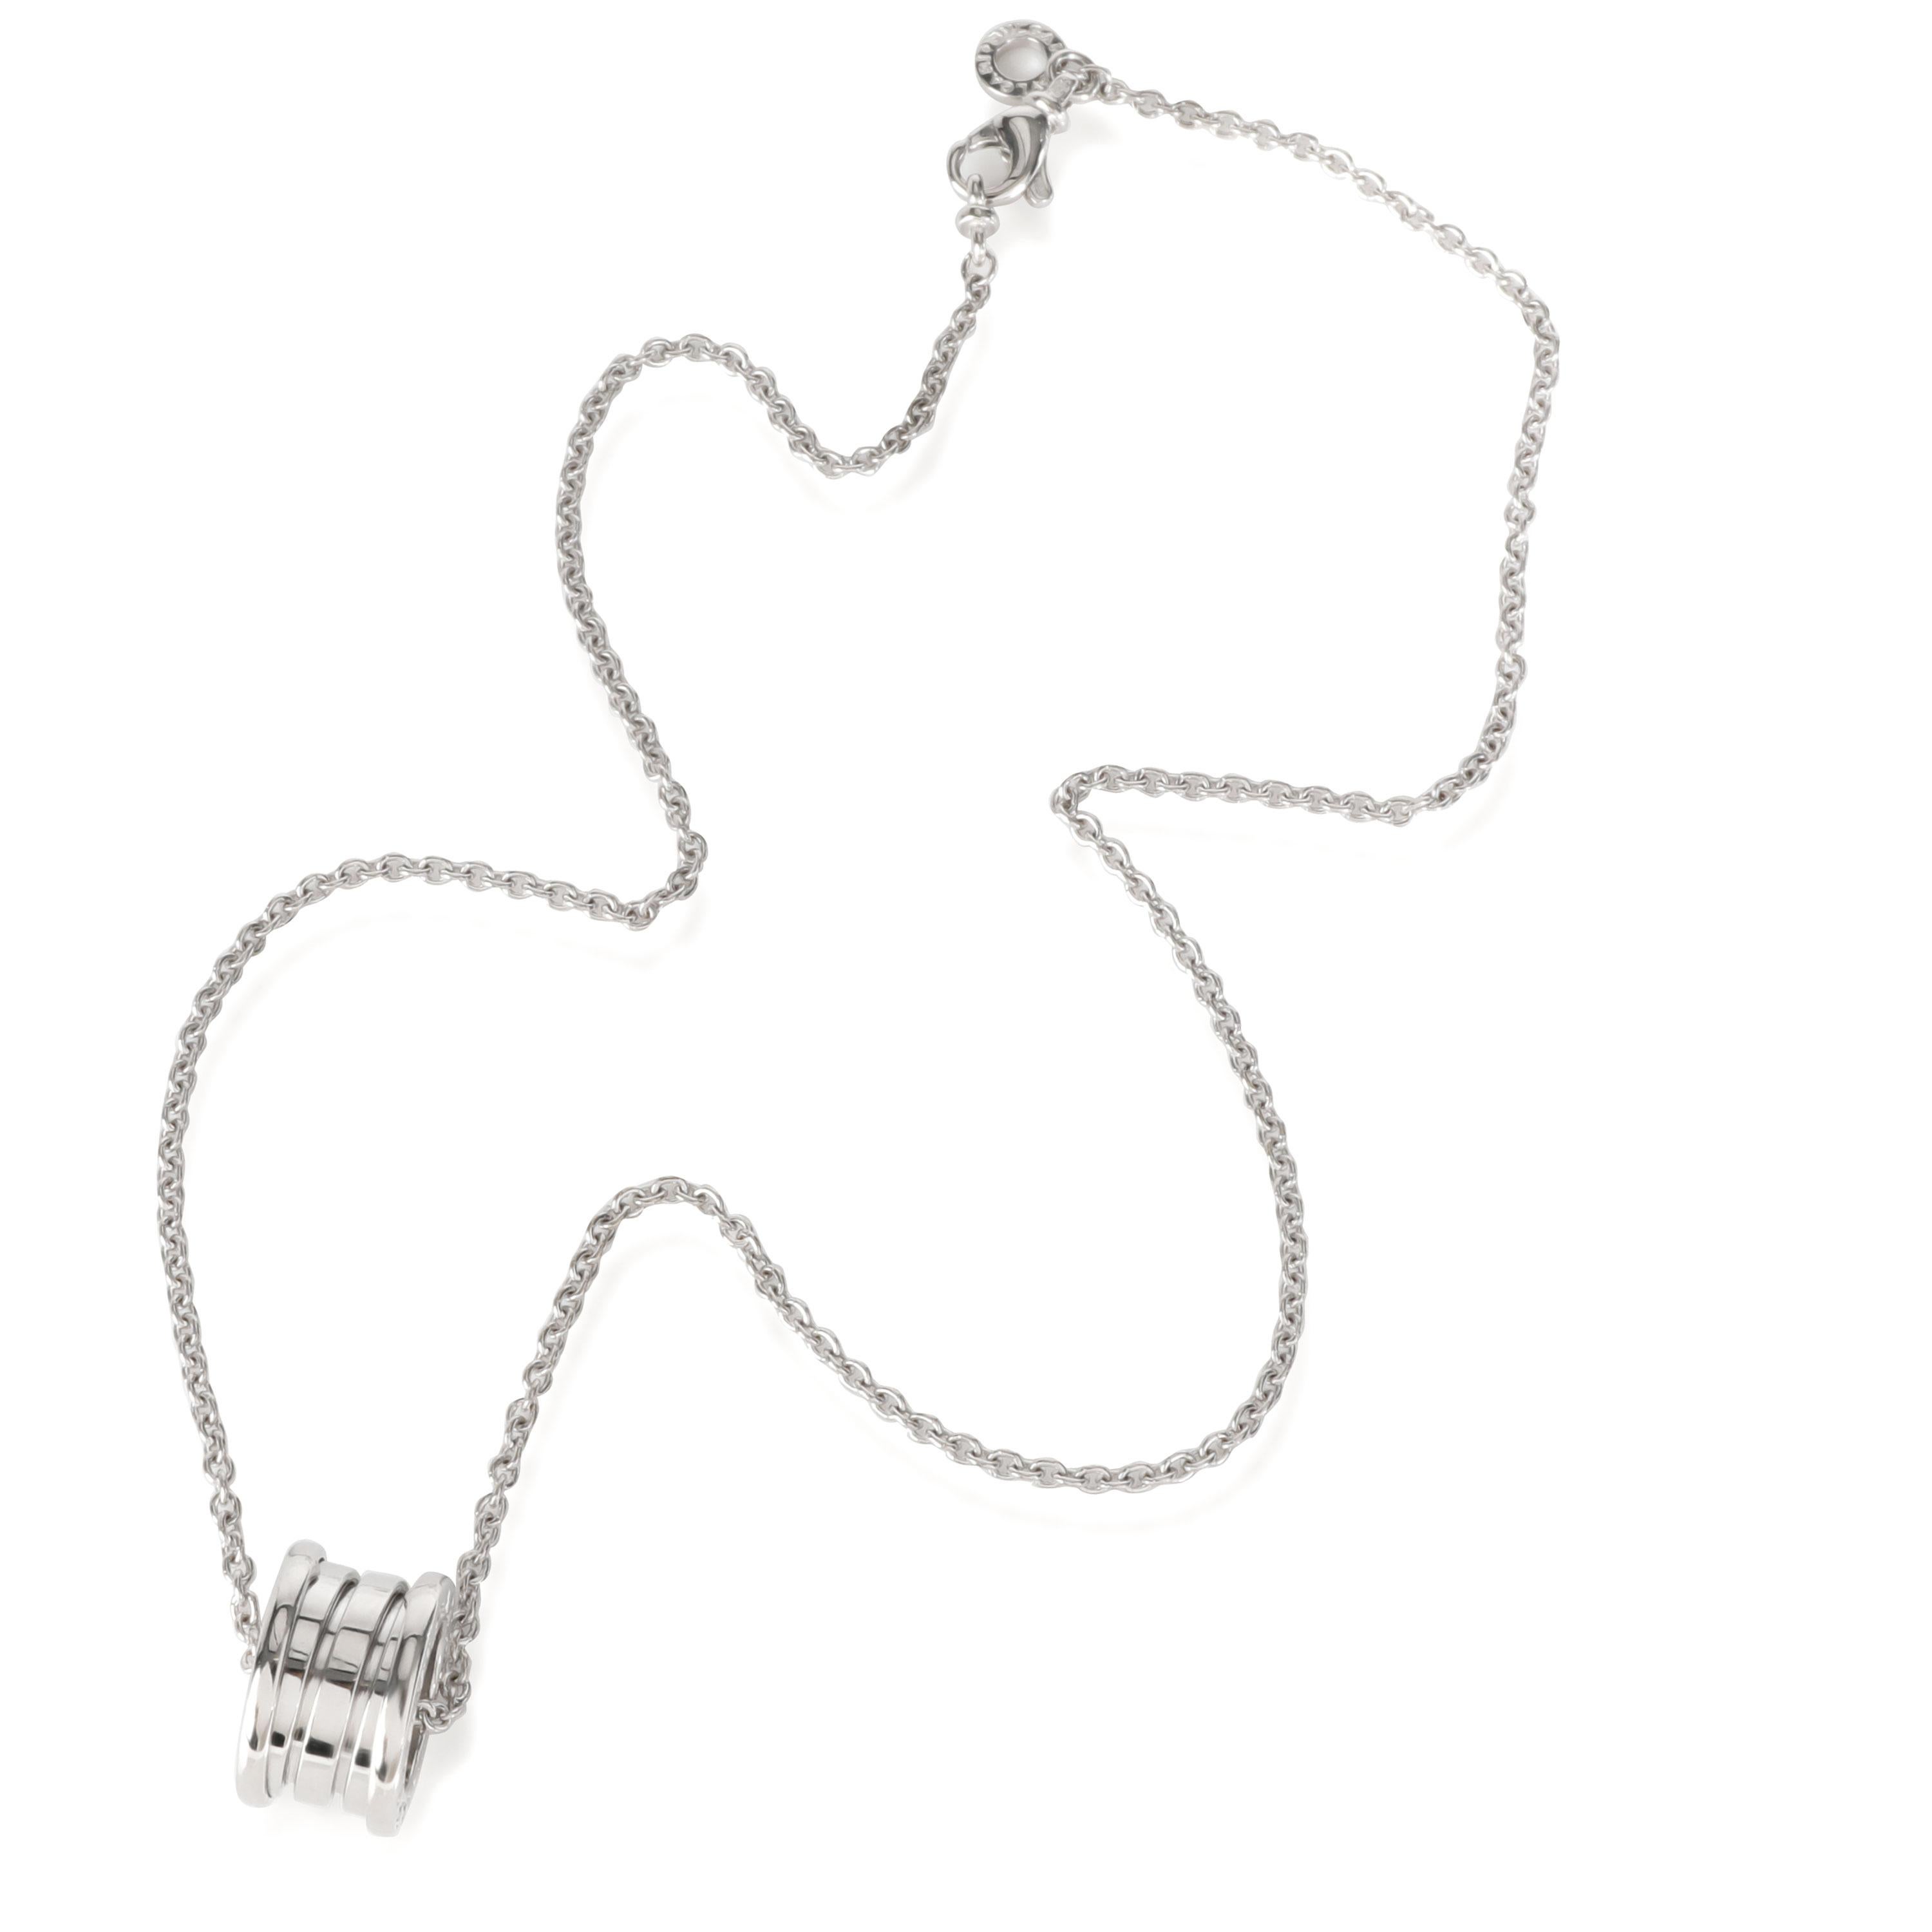 Bulgari B. Zero 1 Pendant in 18k White Gold

PRIMARY DETAILS
SKU: 112702
Listing Title: Bulgari B. Zero 1 Pendant in 18k White Gold
Condition Description: Retails for 3,600 USD. In excellent condition and recently polished. Chain is 16 inches in